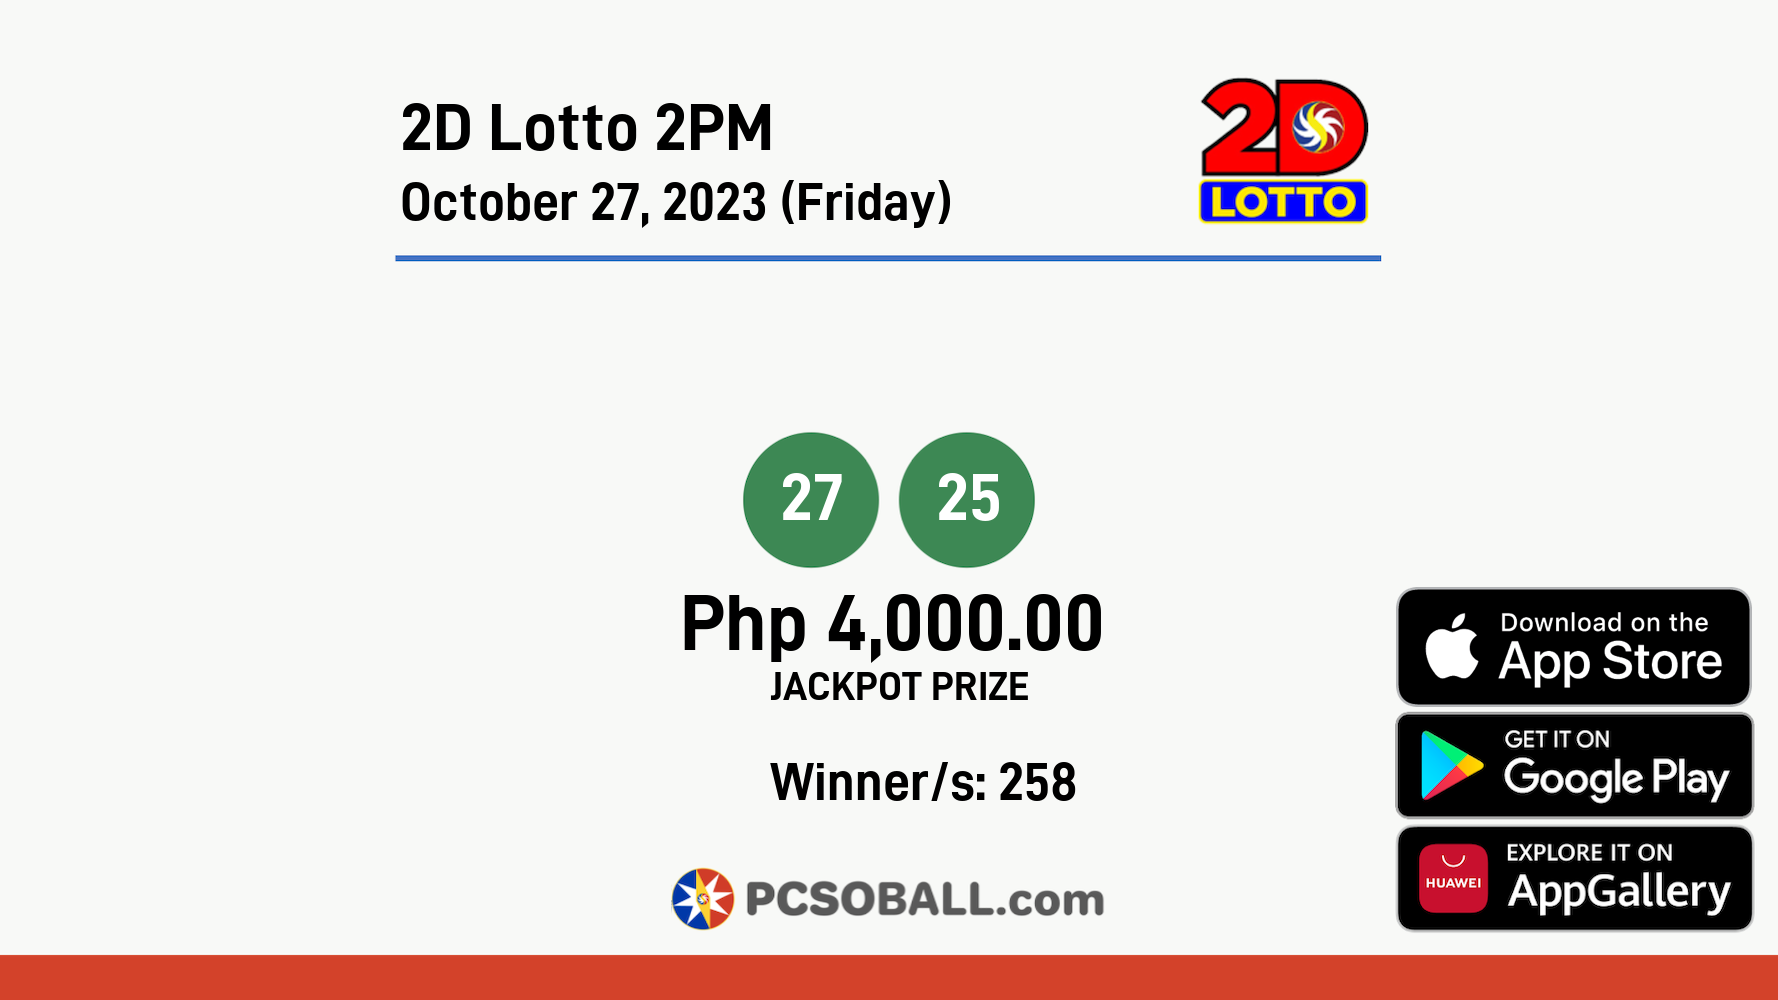 2D Lotto 2PM October 27, 2023 (Friday) Result